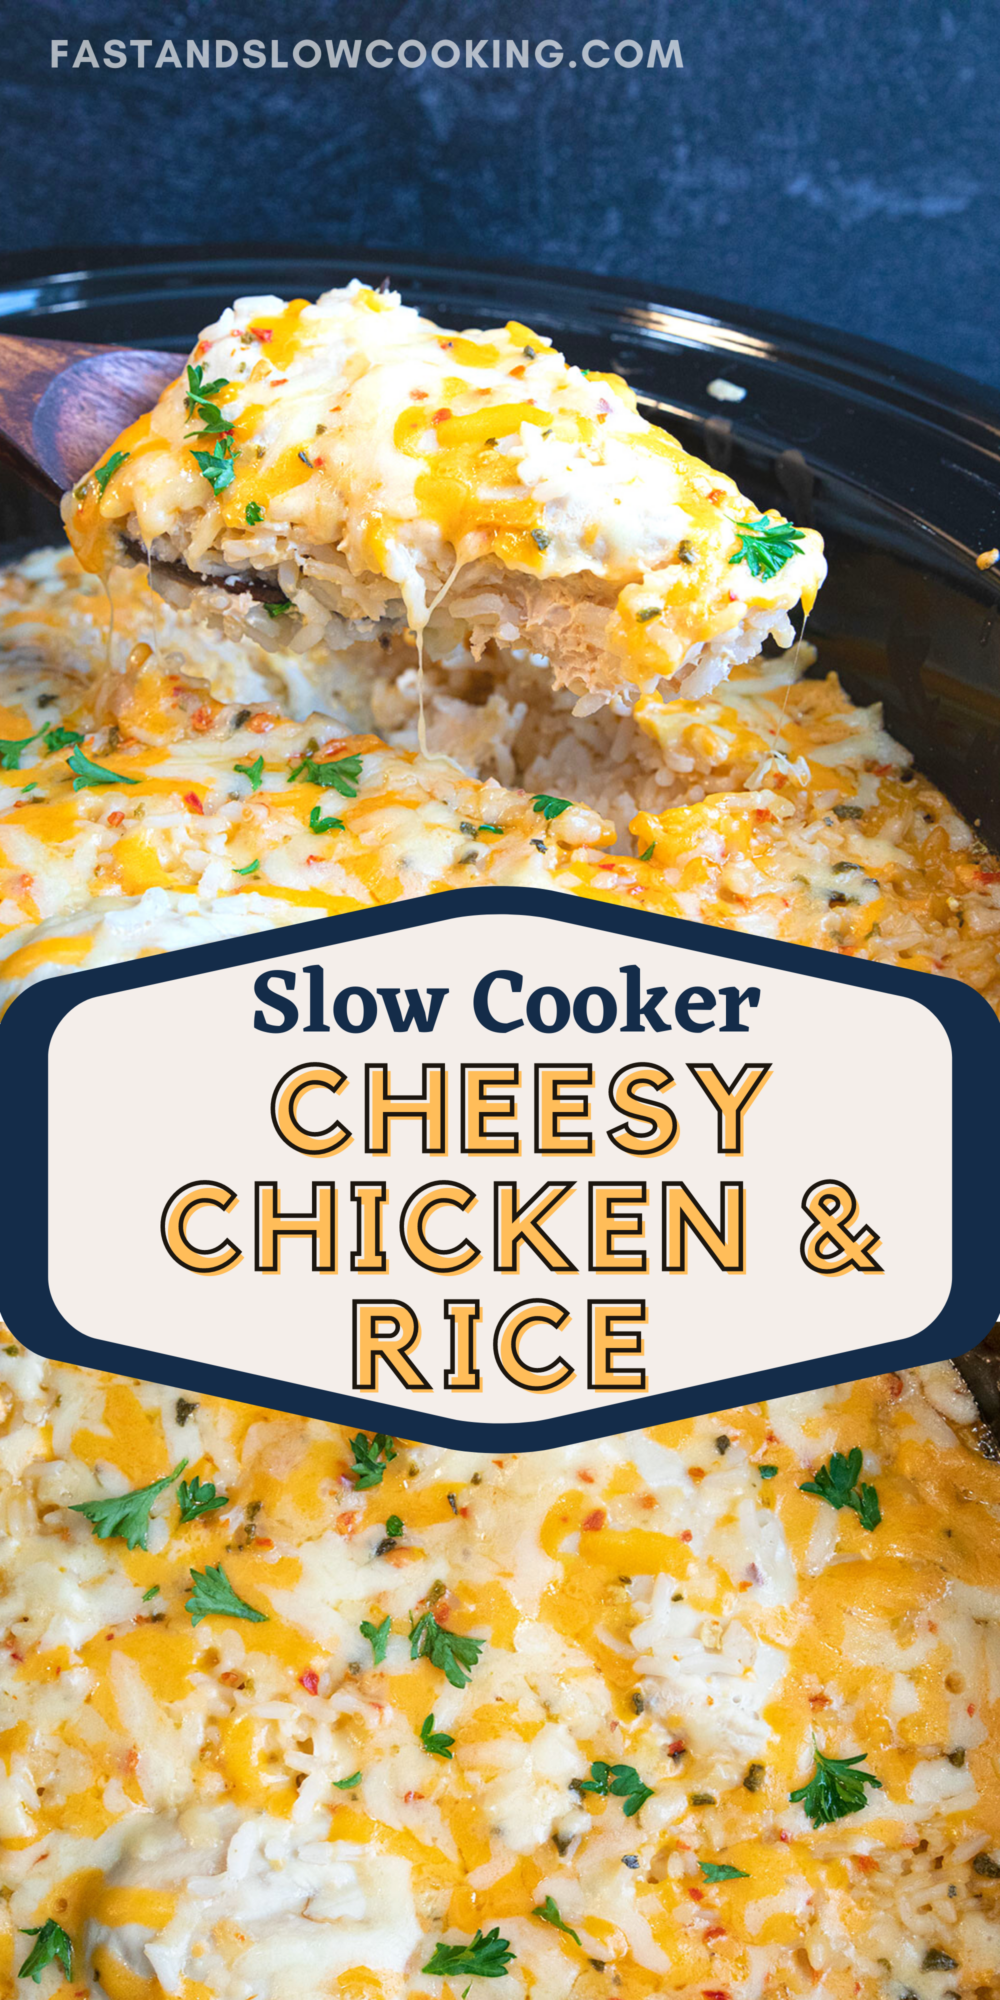 Chicken breast in the slow cooker is cooked to tender perfection in a cheesy rice mixture - the perfect one "crock" dinner!  